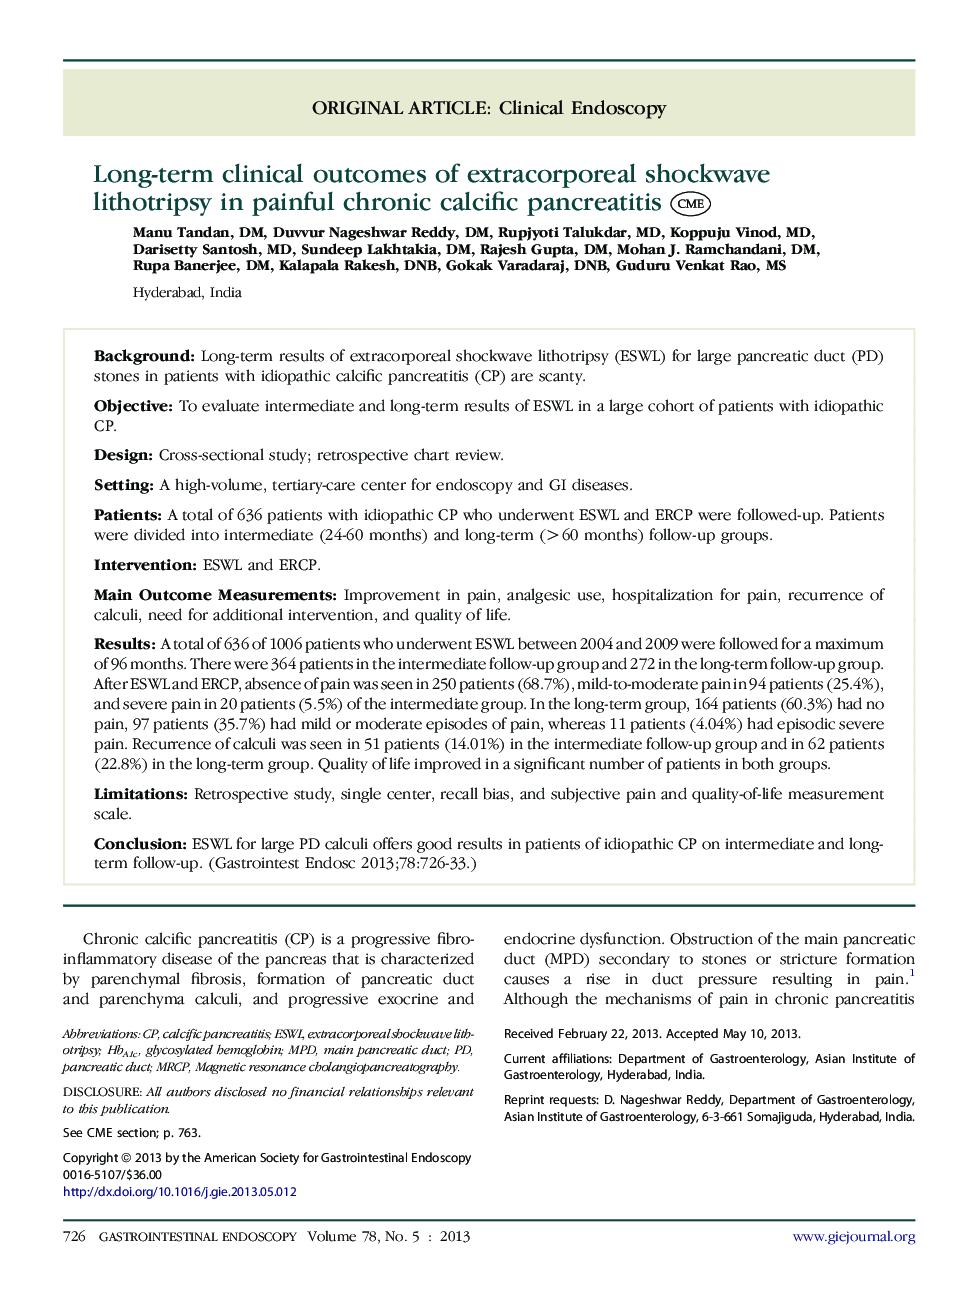 Long-term clinical outcomes of extracorporeal shockwave lithotripsy in painful chronic calcific pancreatitis 